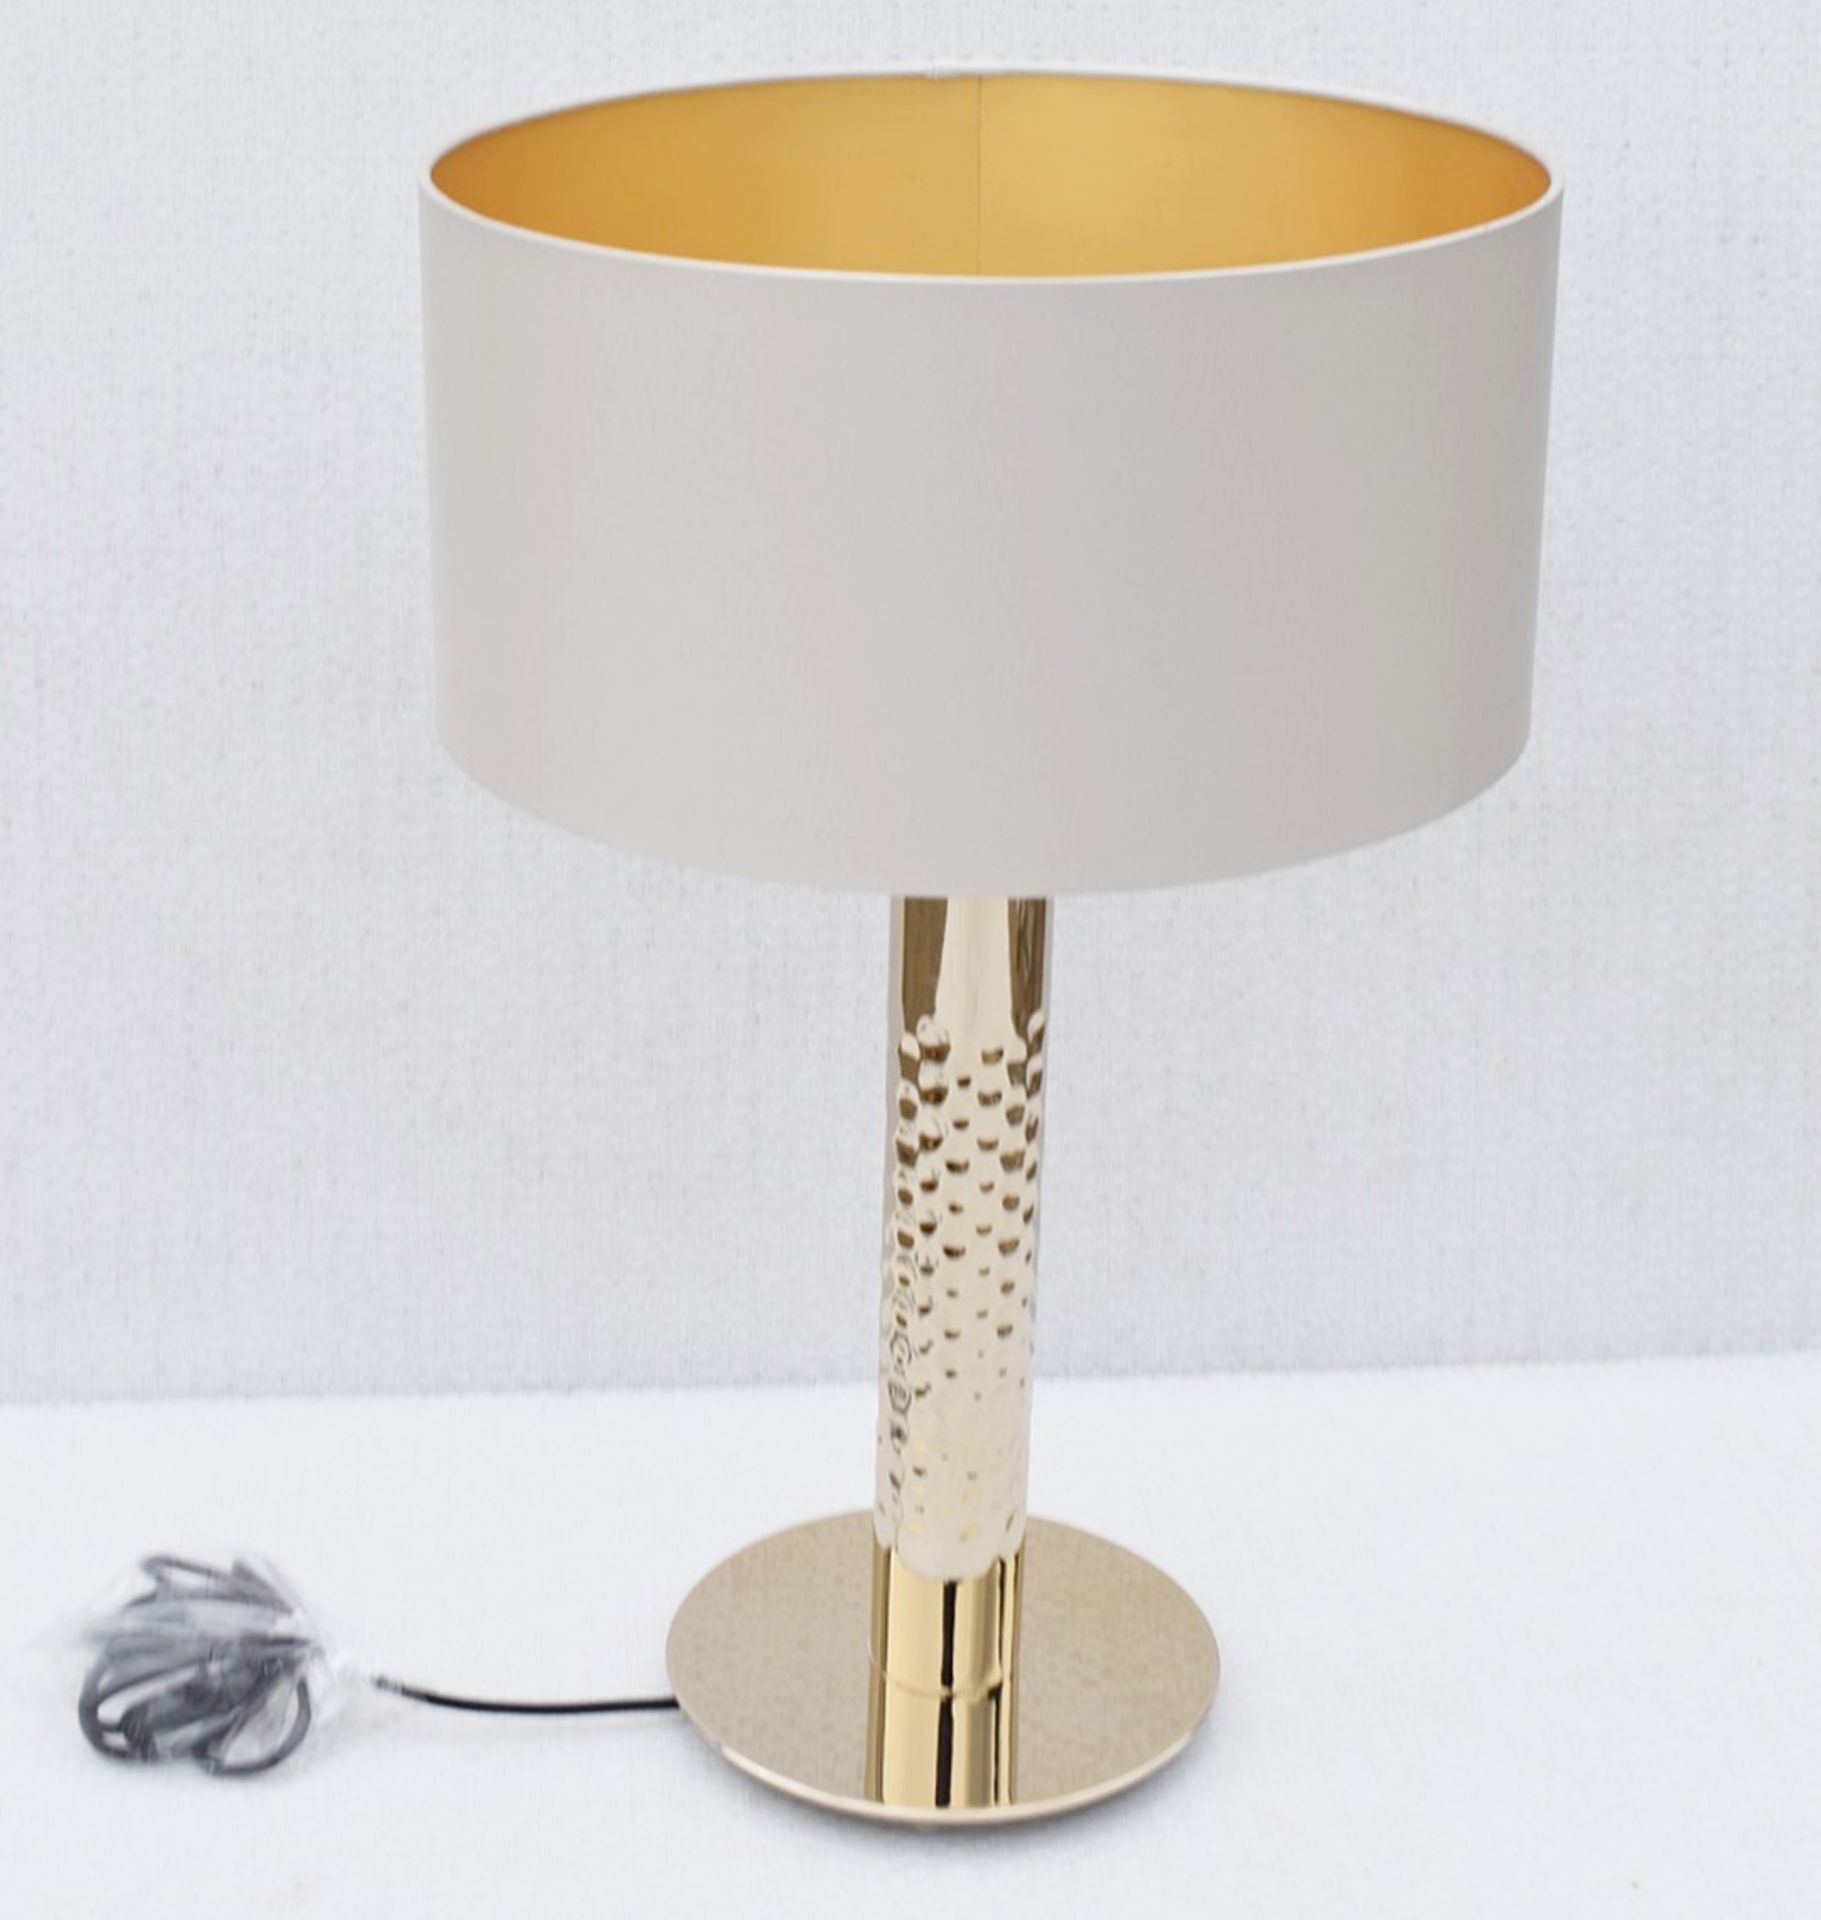 1 x CASTRO LIGHTING 'Safi' Opulent 24k Gold Plated Table Lamp with Silk Shade - Original Price £450 - Image 2 of 11